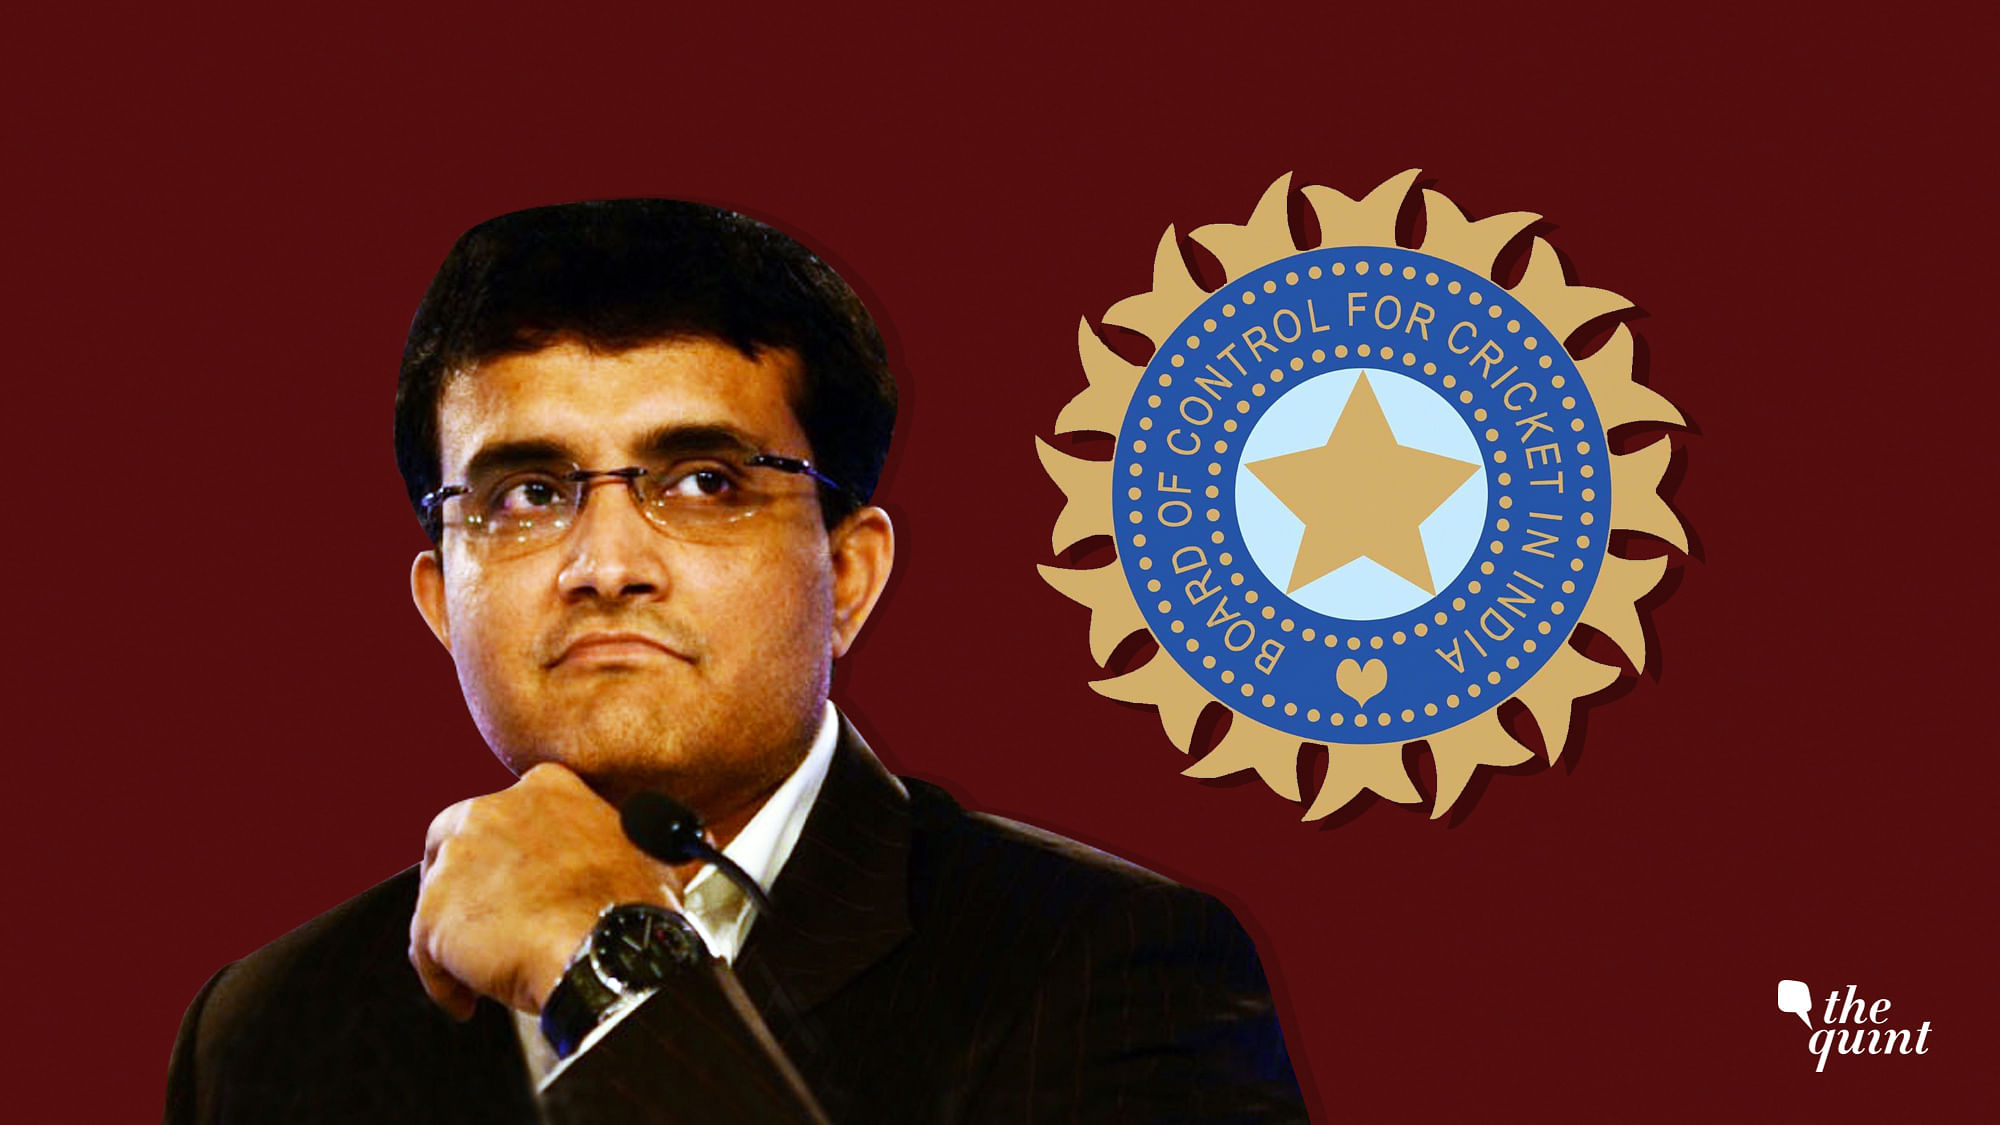 Sourav Ganguly became the new BCCI President on 23 October 2019.